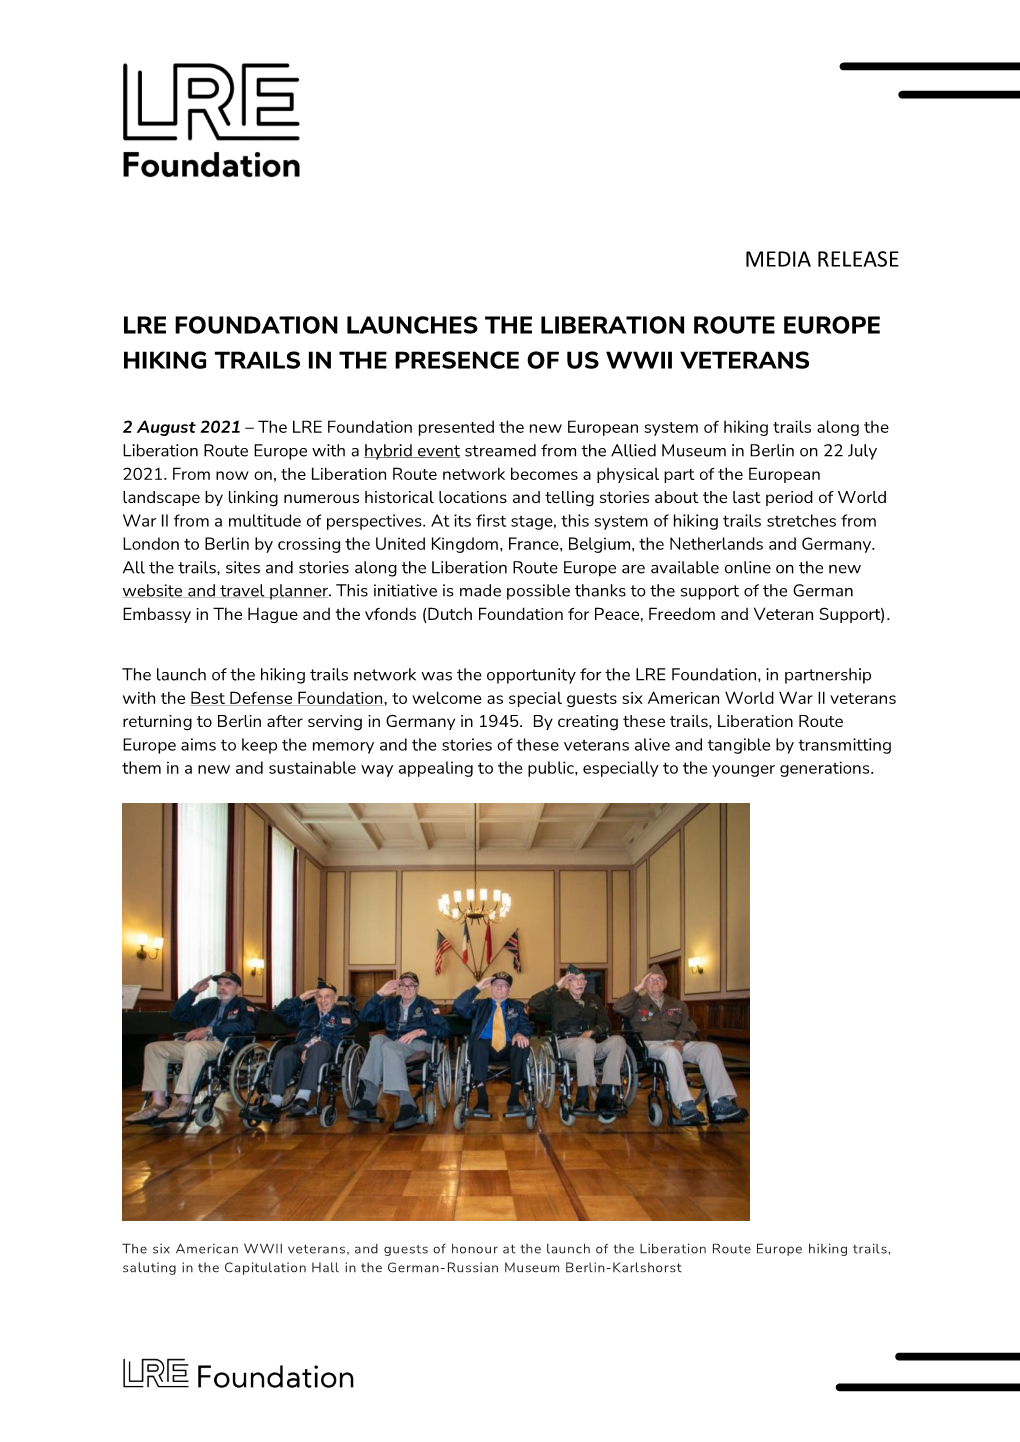 Media Release Lre Foundation Launches the Liberation